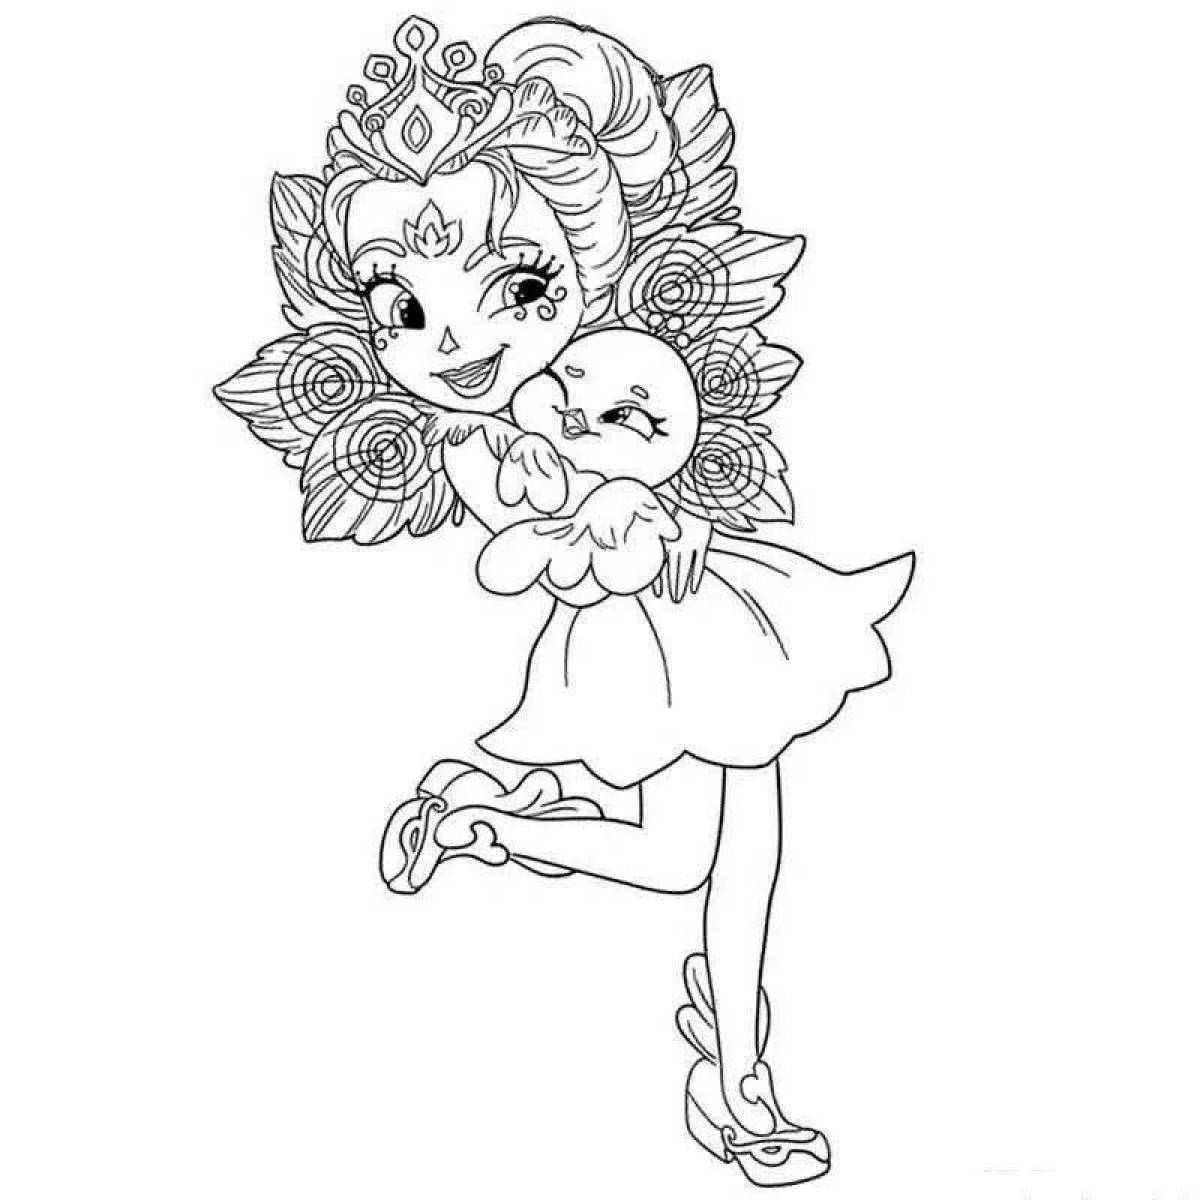 Delightful enchancimals coloring pages